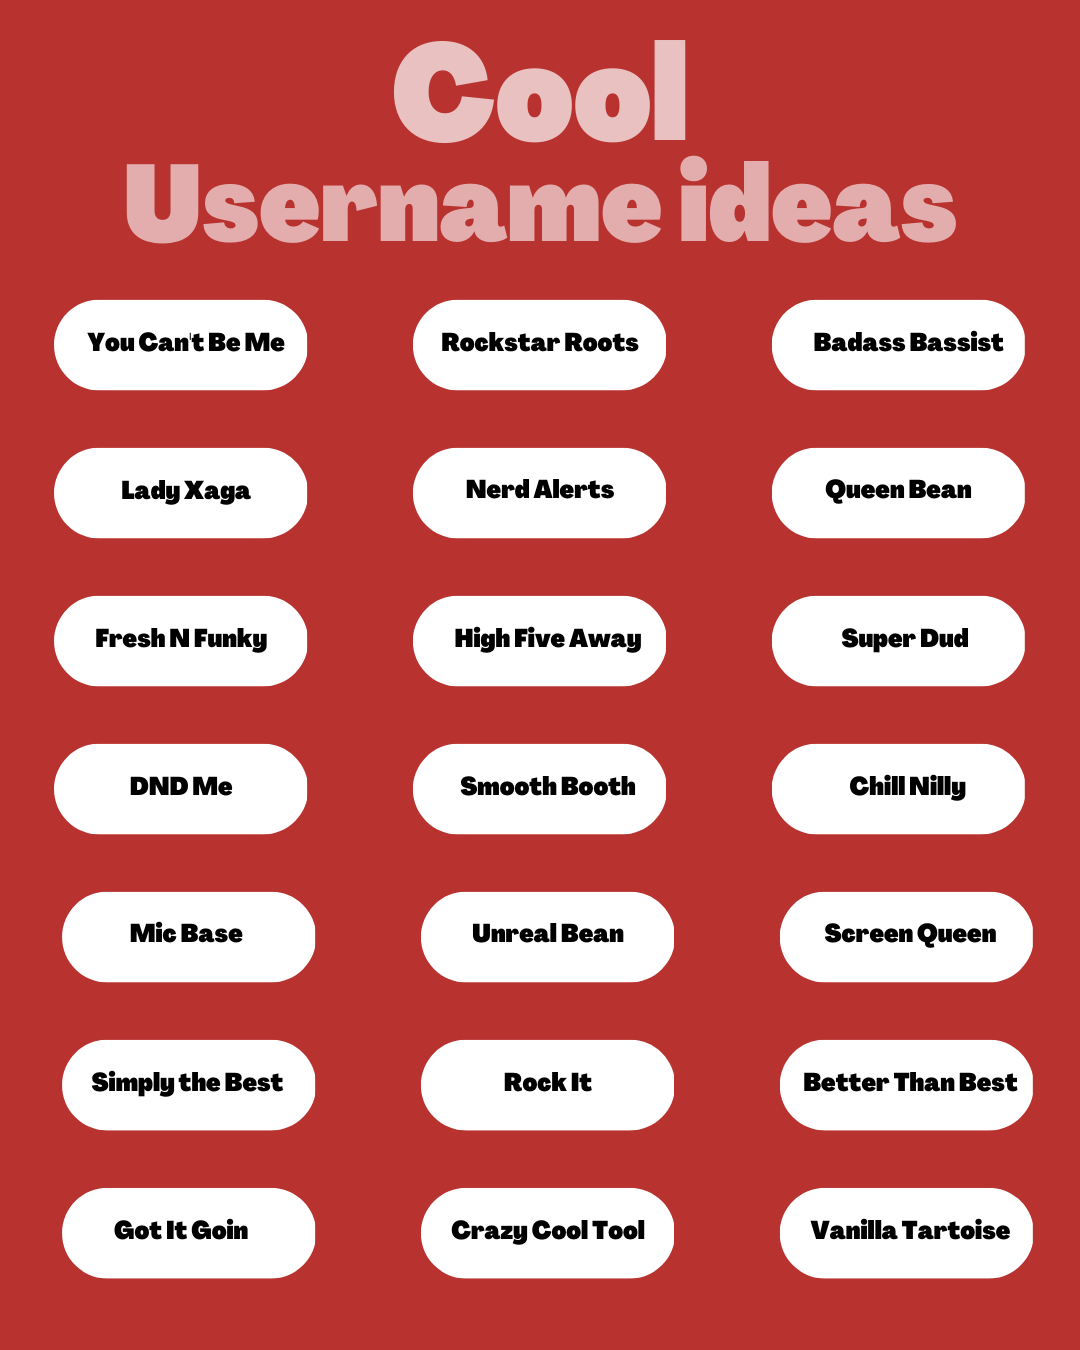 Remote.tools shares a list of cool username ideas for your social handles.